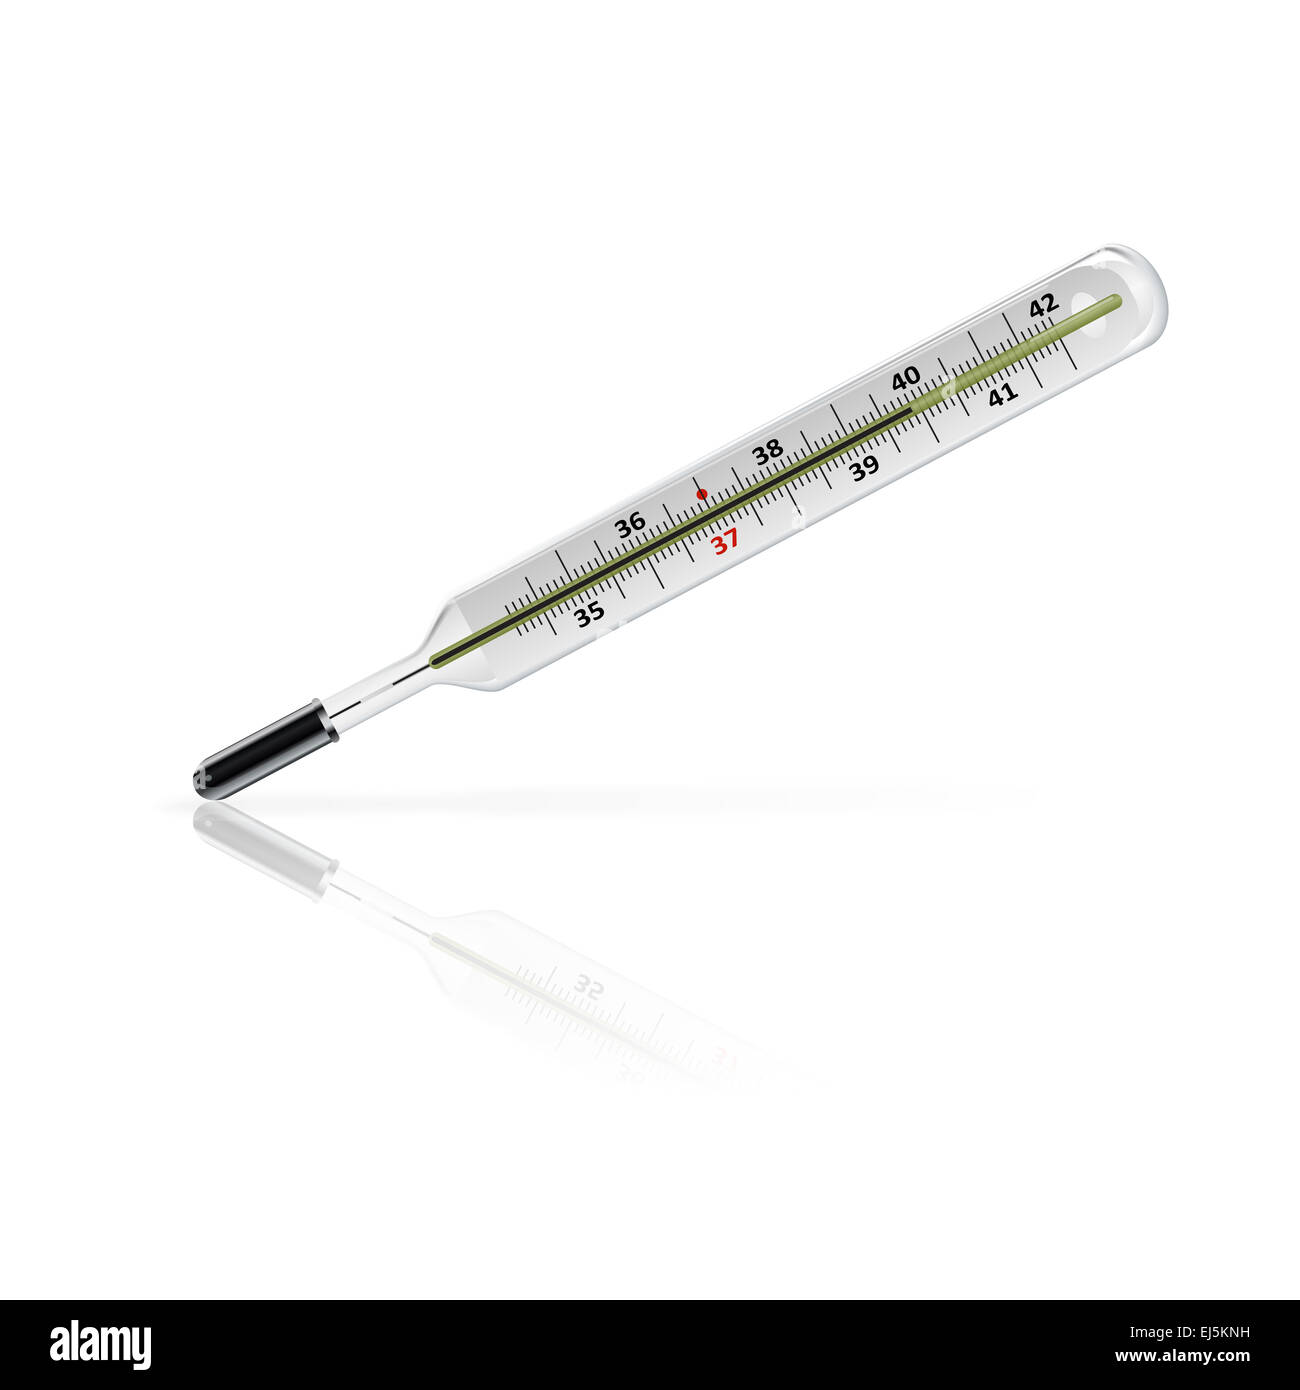 Vector image of glass medicine real thermometer Stock Photo - Alamy